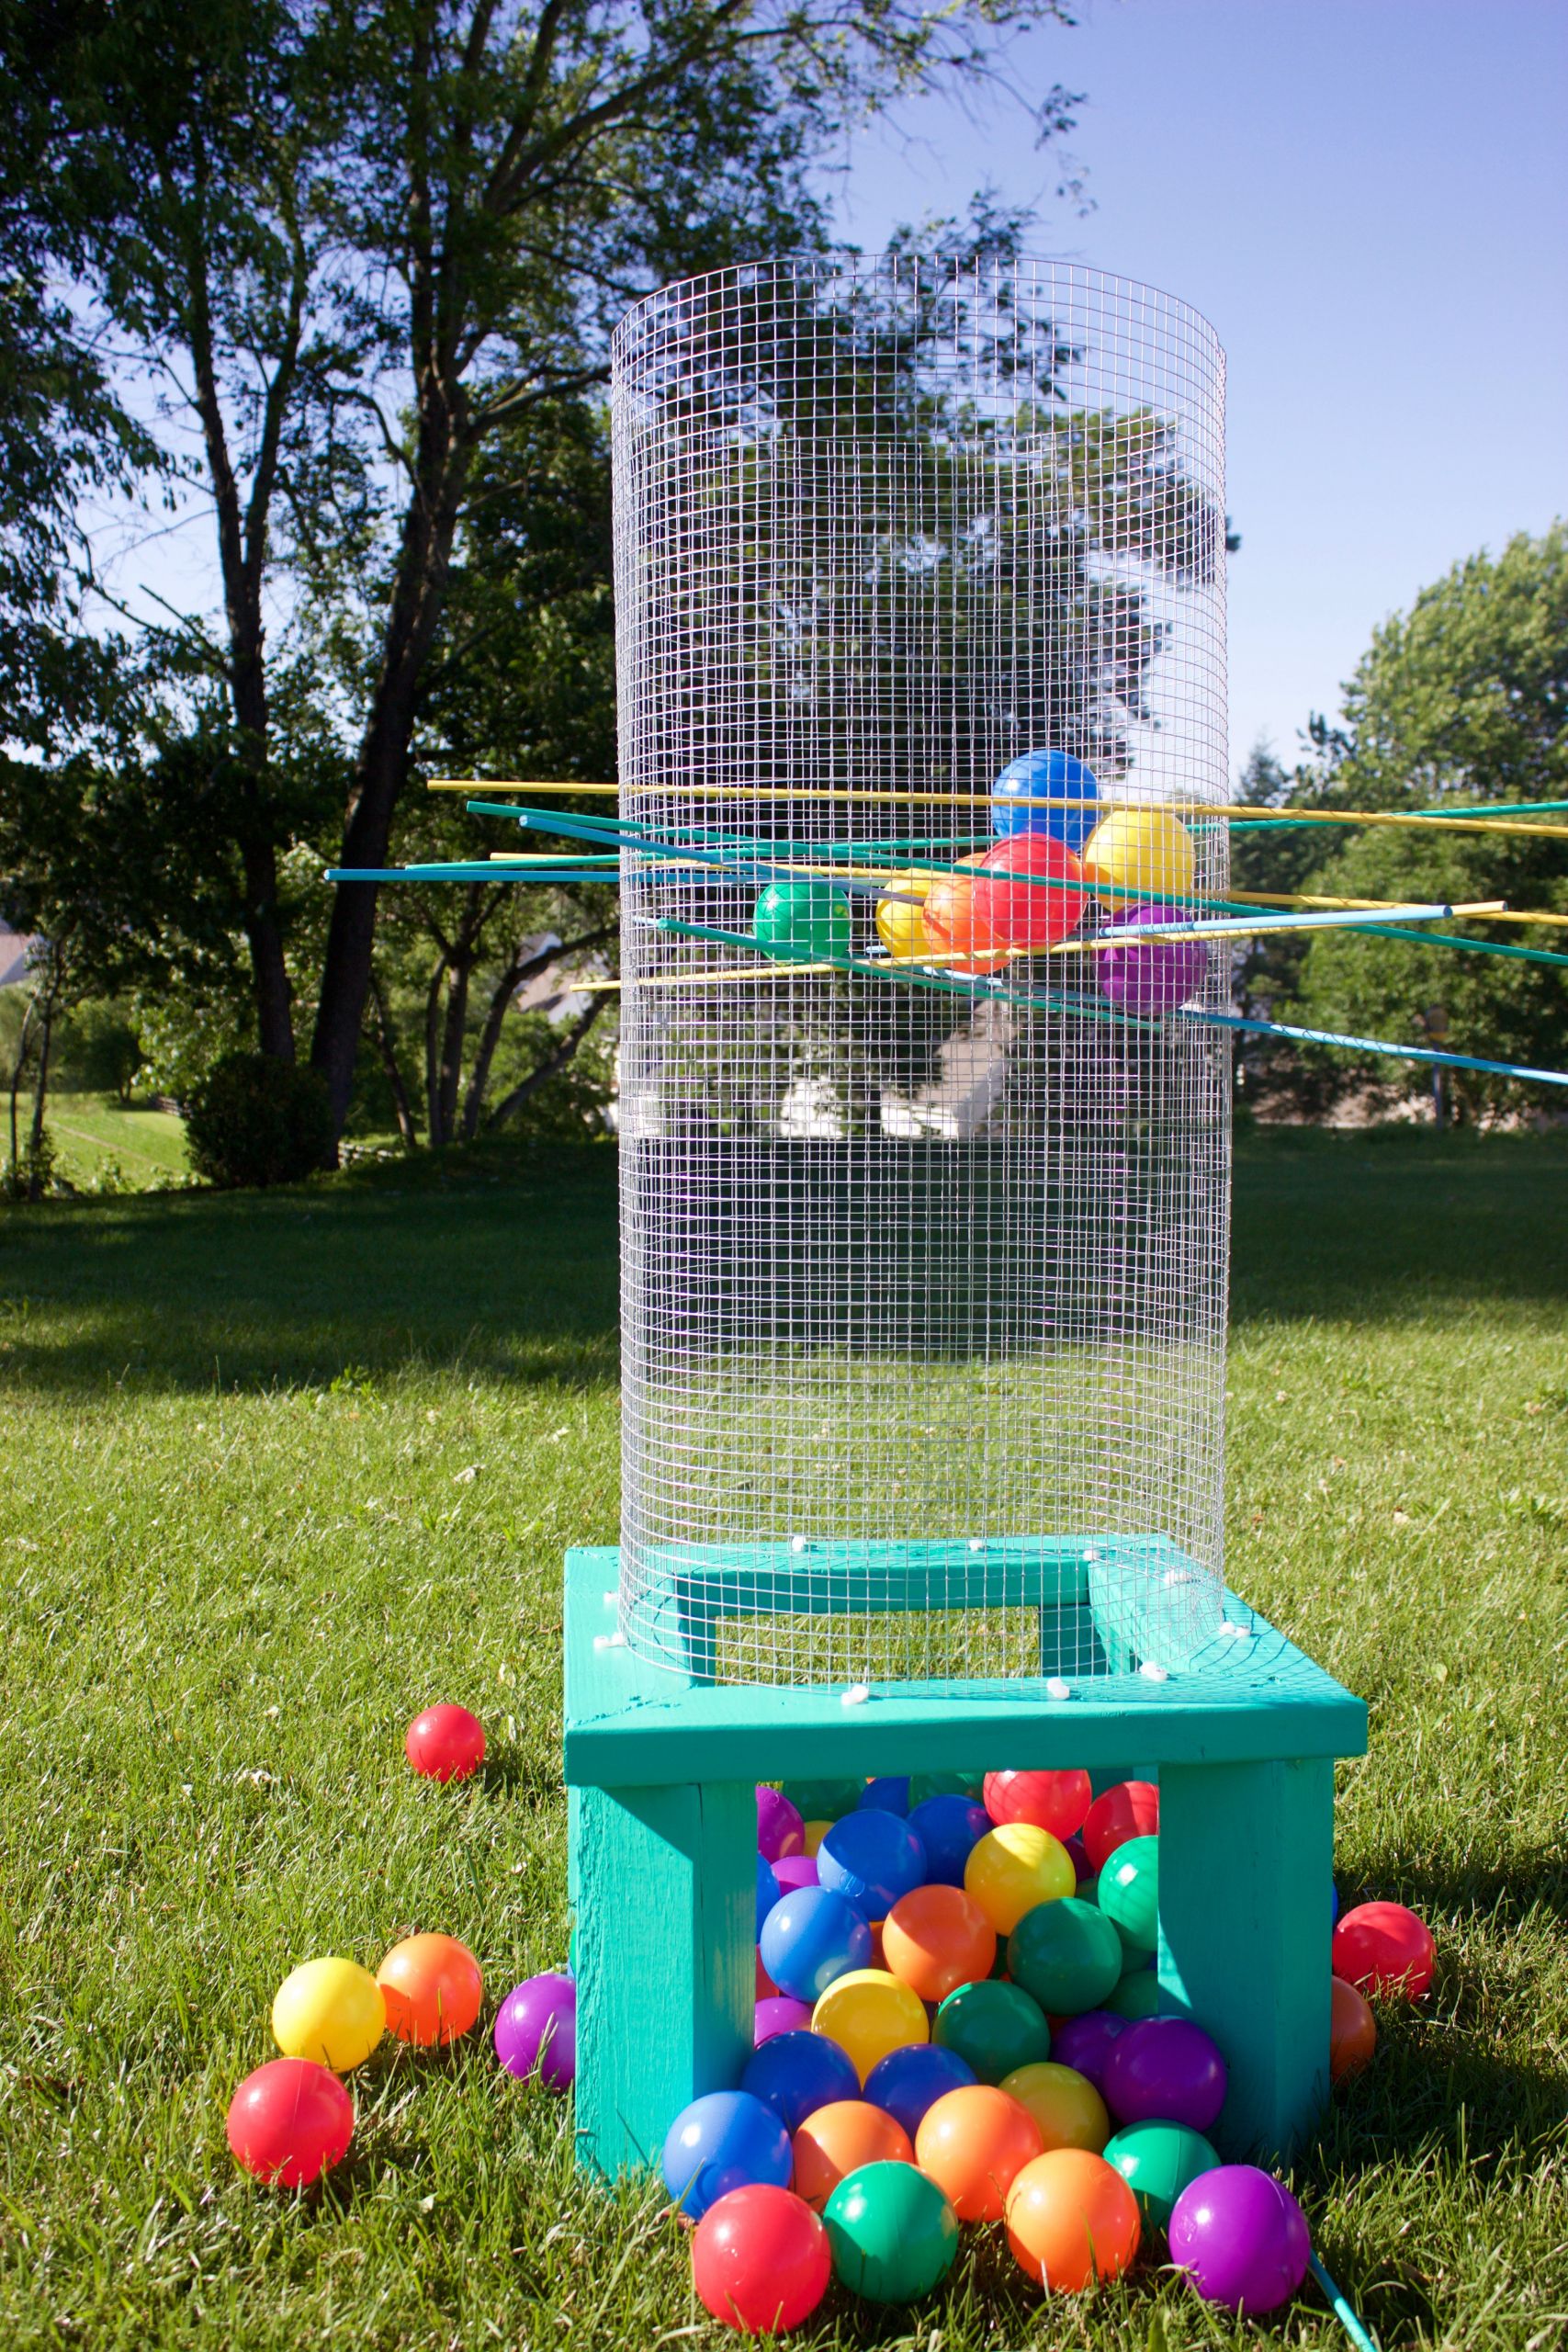 DIY Giant Outdoor Games
 DIY Outdoor Games You Have To Try This Summer Resin Crafts